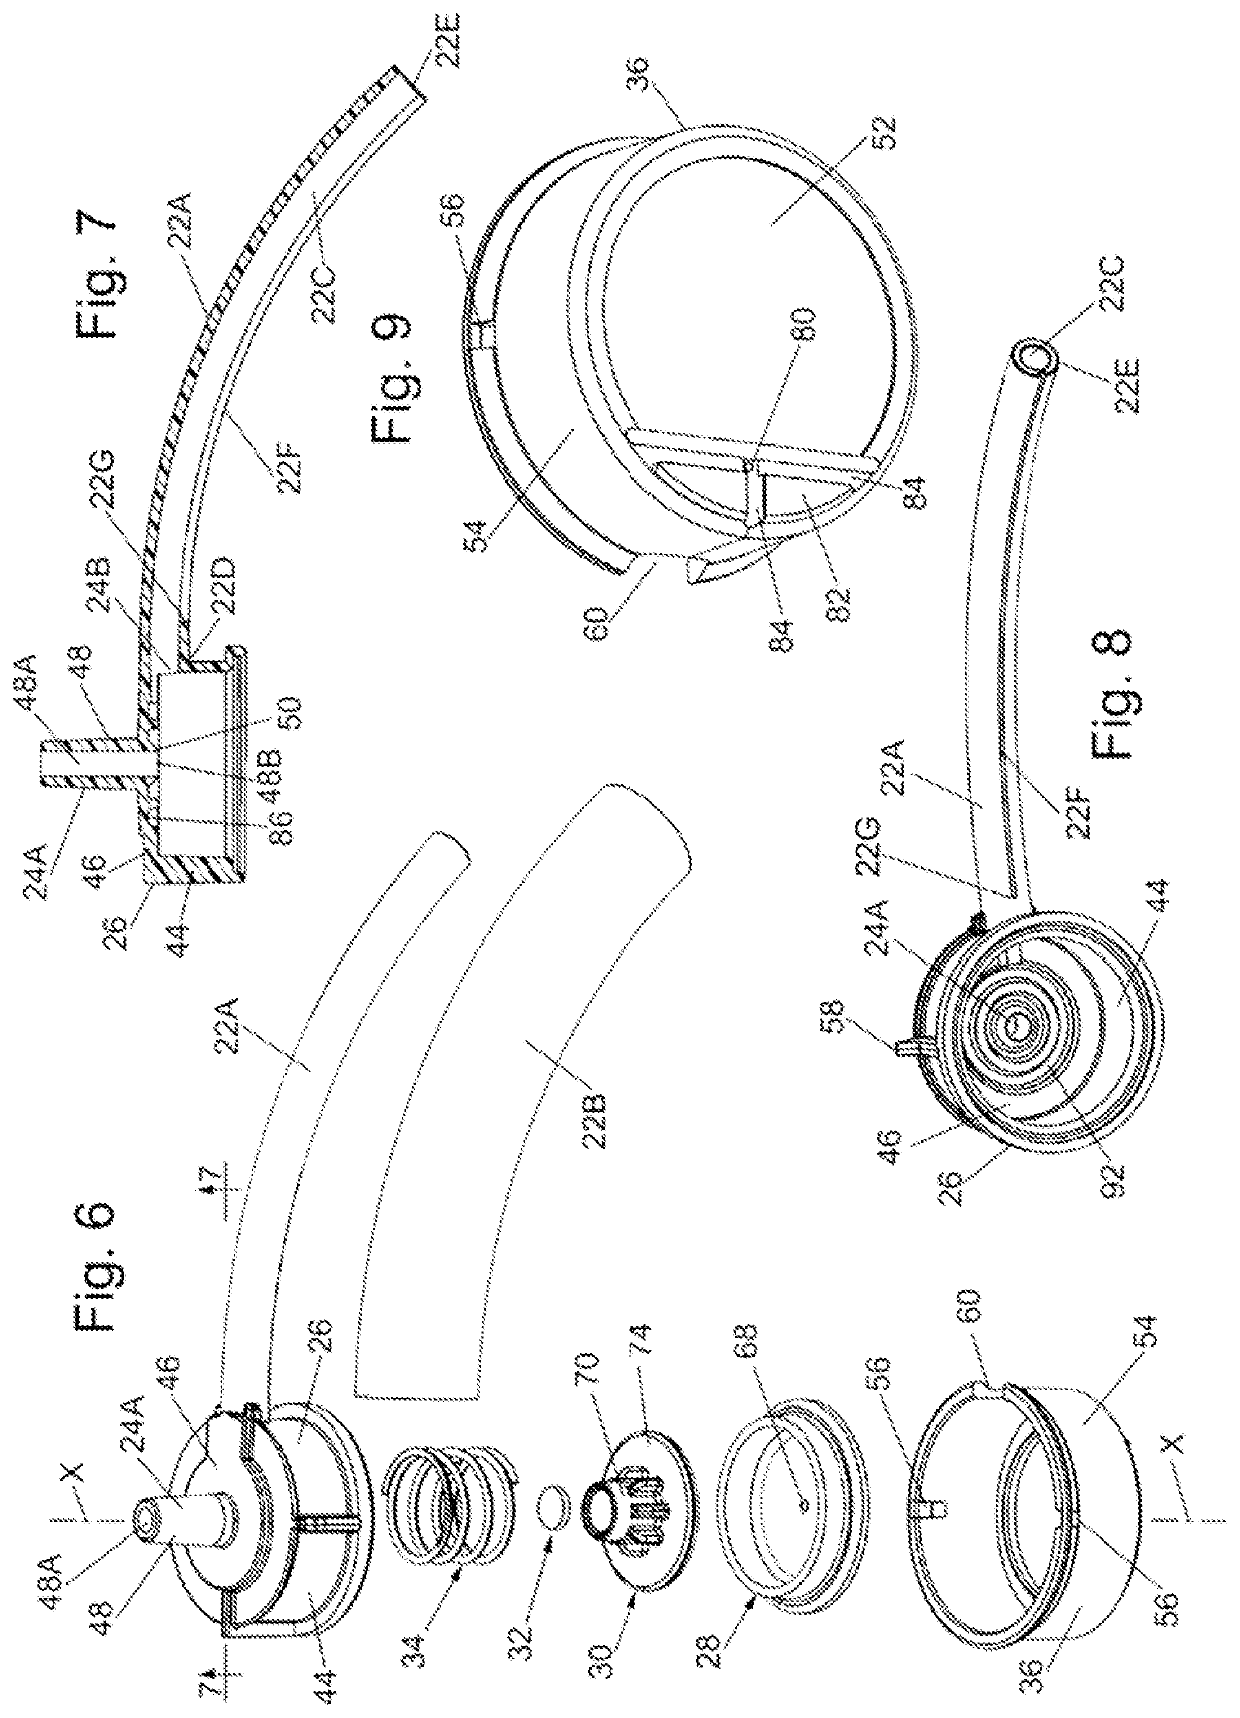 Method of use of external female catheter system with integrated suction regulator